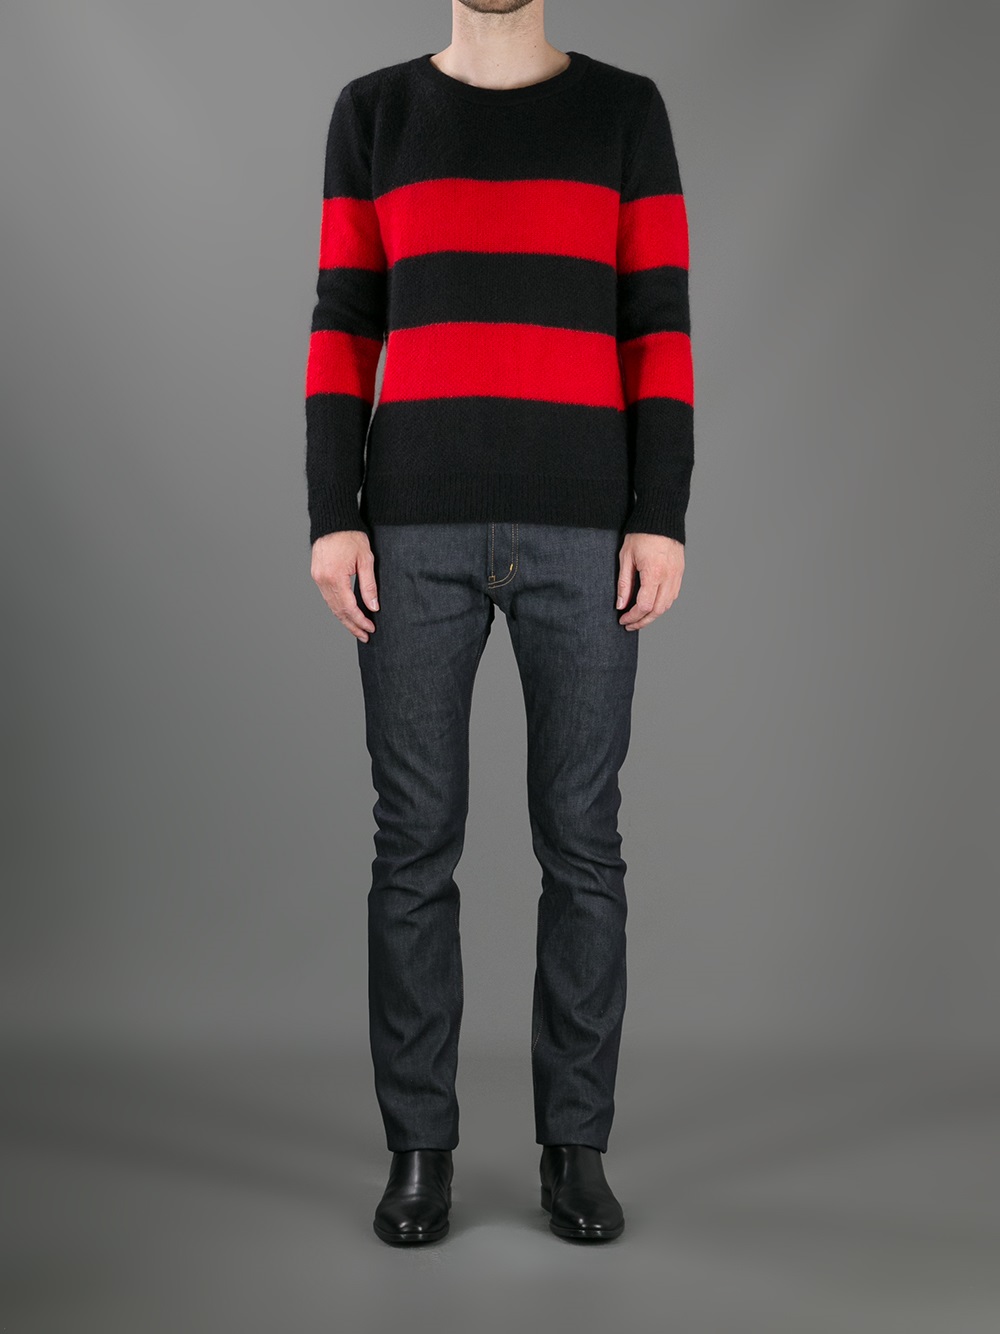 Saint laurent Striped Sweater in Red for Men | Lyst